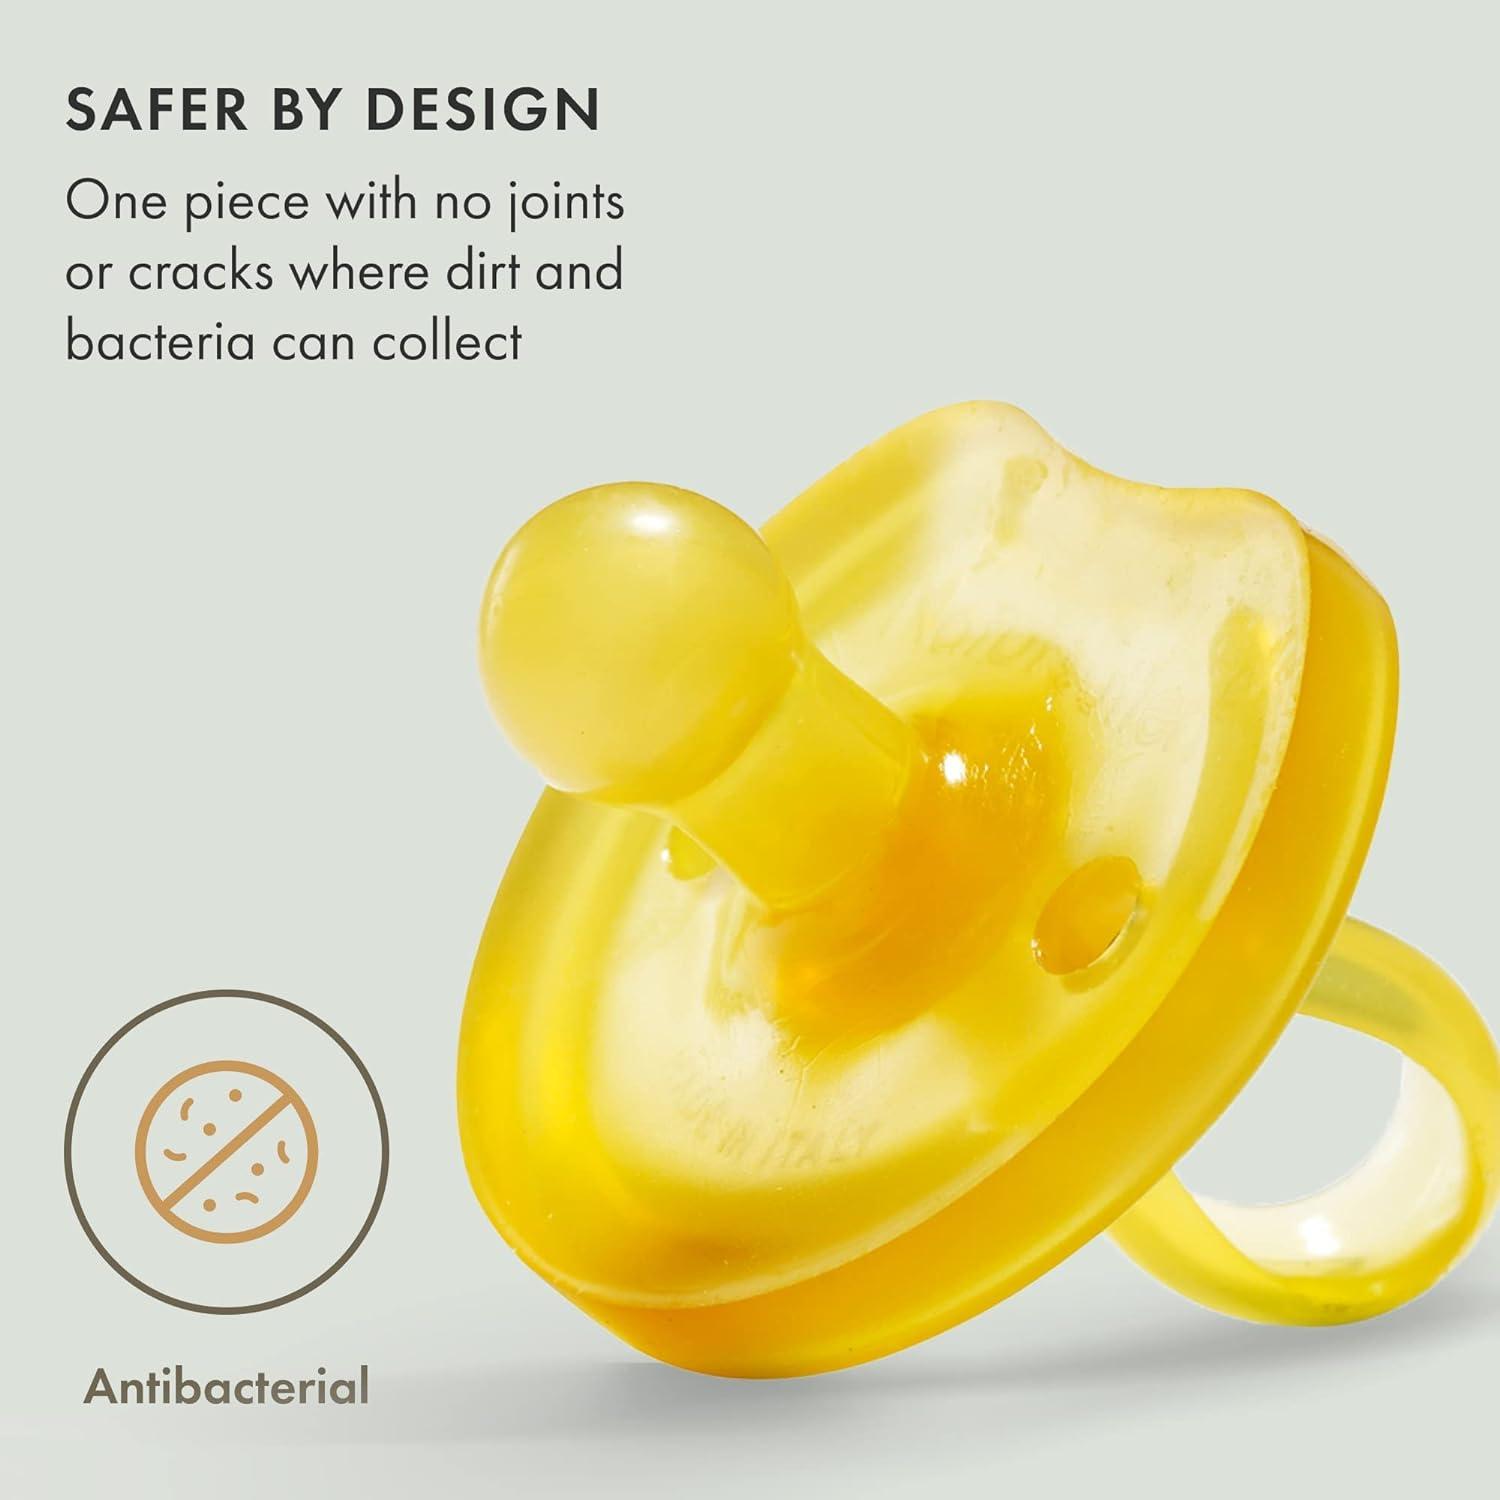 Natursutten Pacifiers 12-18 Months - 2-Pack Butterfly Shield Orthodontic  Nipple Natural Rubber Safe & Soft BPA-Free Pacifiers for Breastfeeding  Babies - Newborn Pacifiers Made in Italy 1 Count (Pack of 2)  Butterfly/Ortho